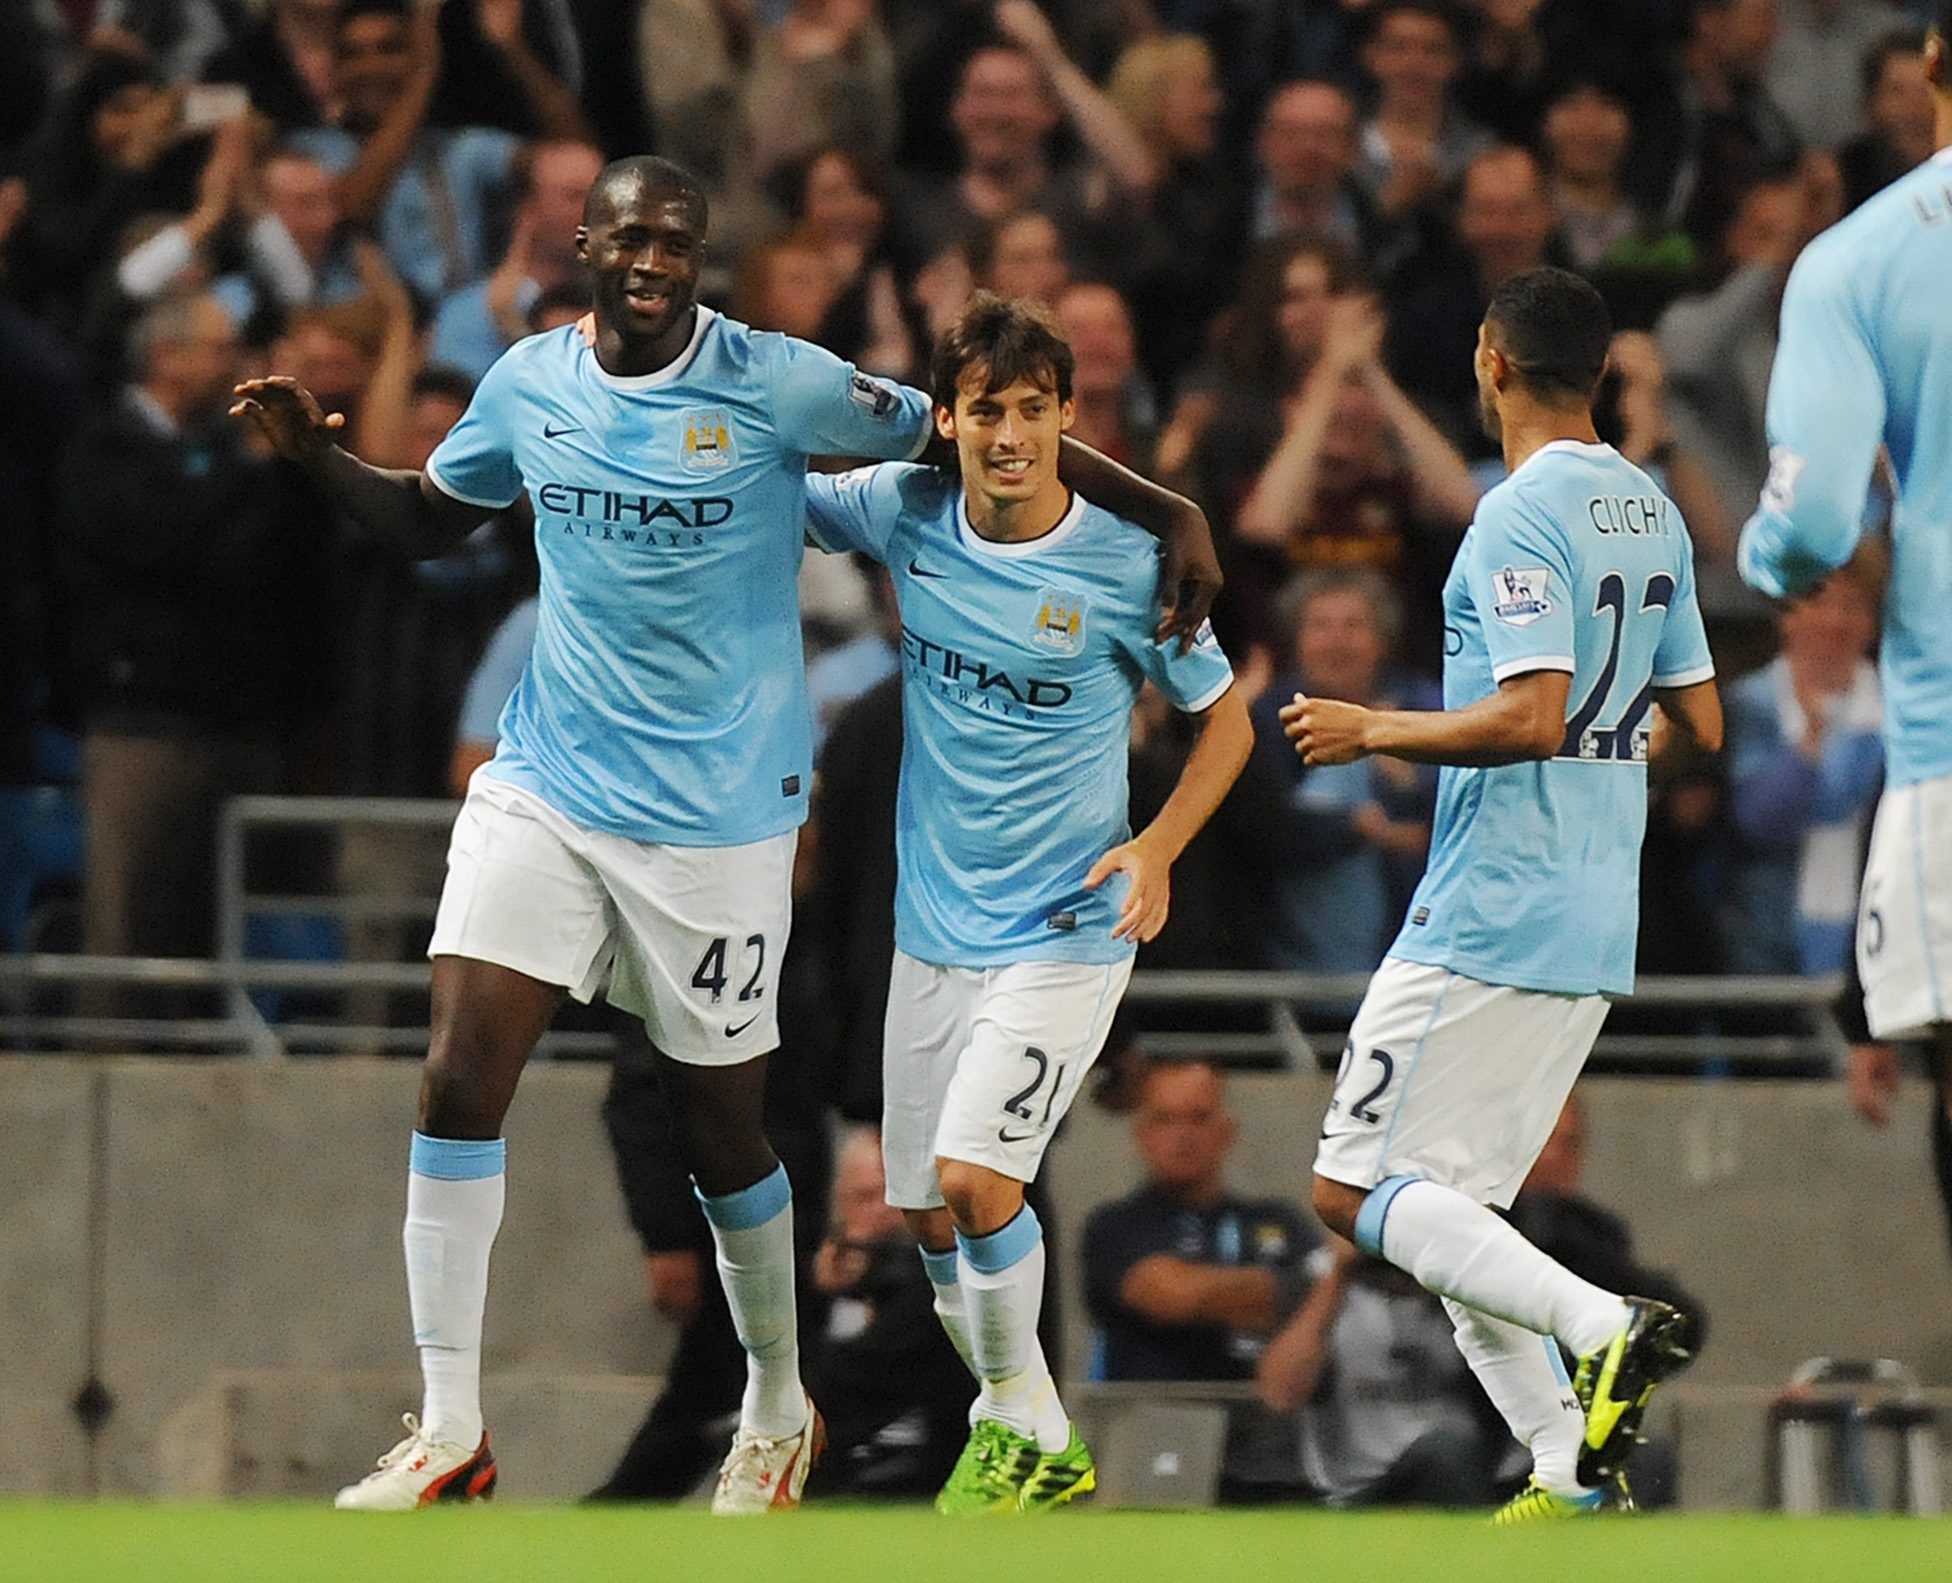 Manchester City's Yaya Toure (left) and teammate David Silva (centre) during the English Premier League match between Manchester City and Newcastle United. Photo: EPA